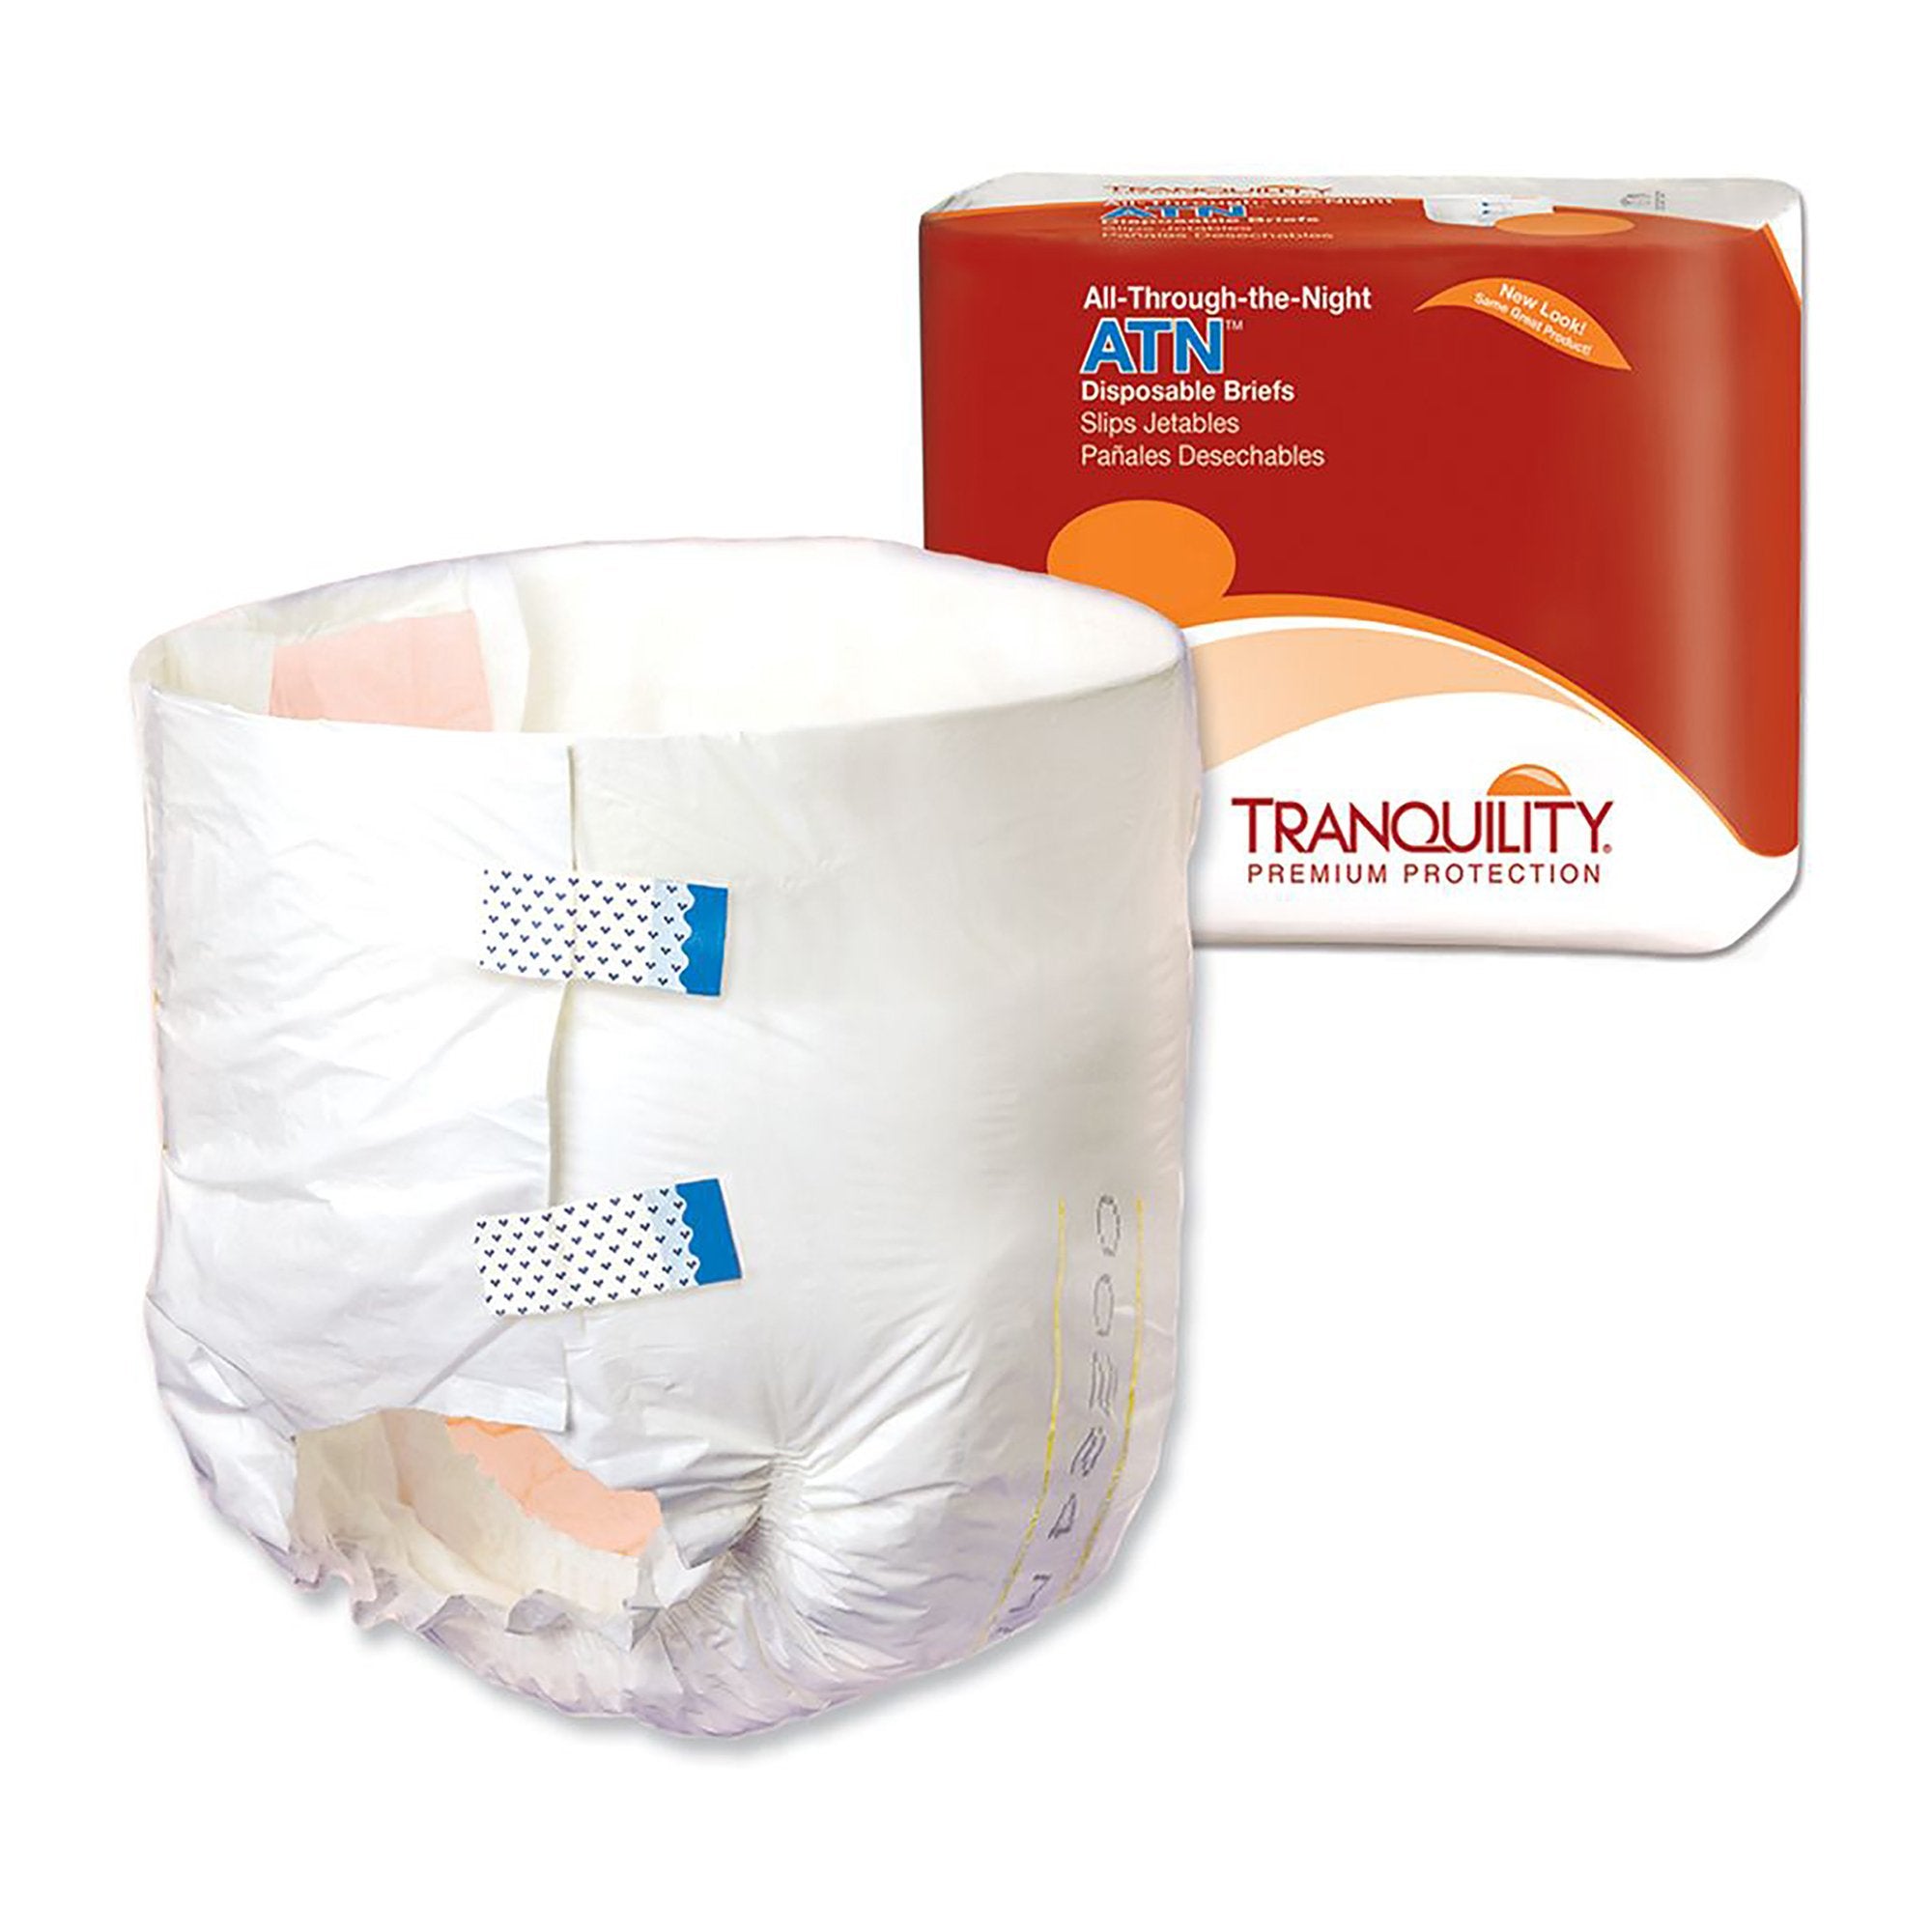 Unisex Adult Incontinence Brief Tranquility® ATN Large Disposable Heavy Absorbency